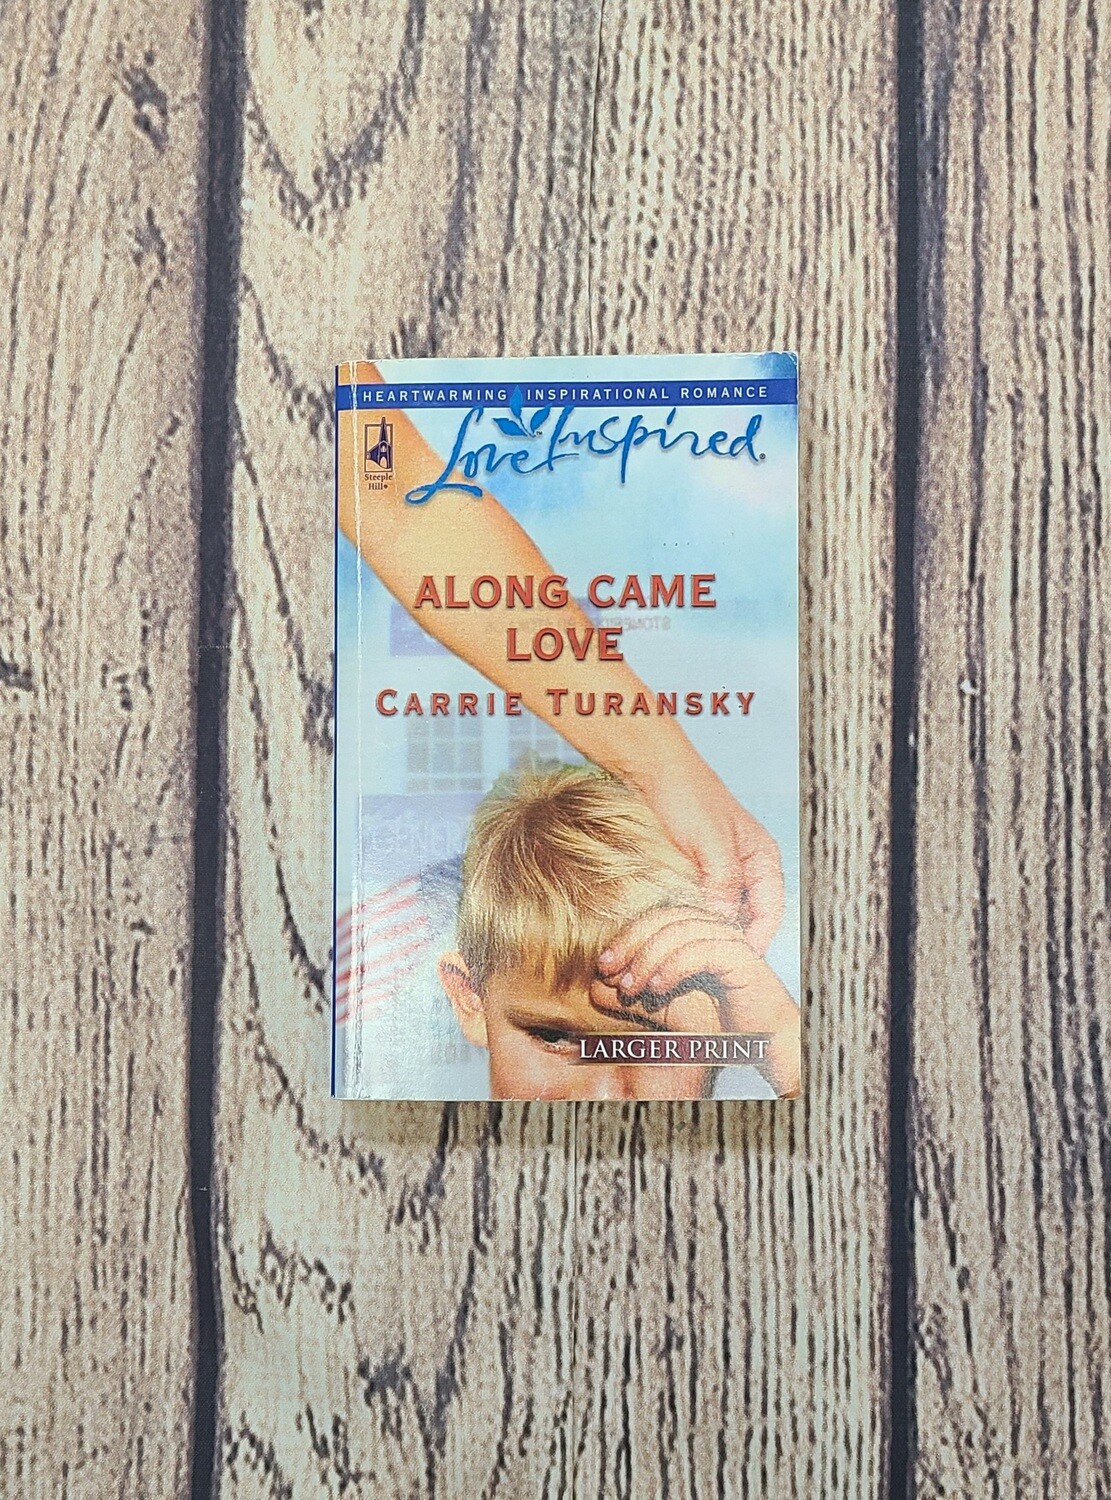 Along Came Love by Carrie Turansky